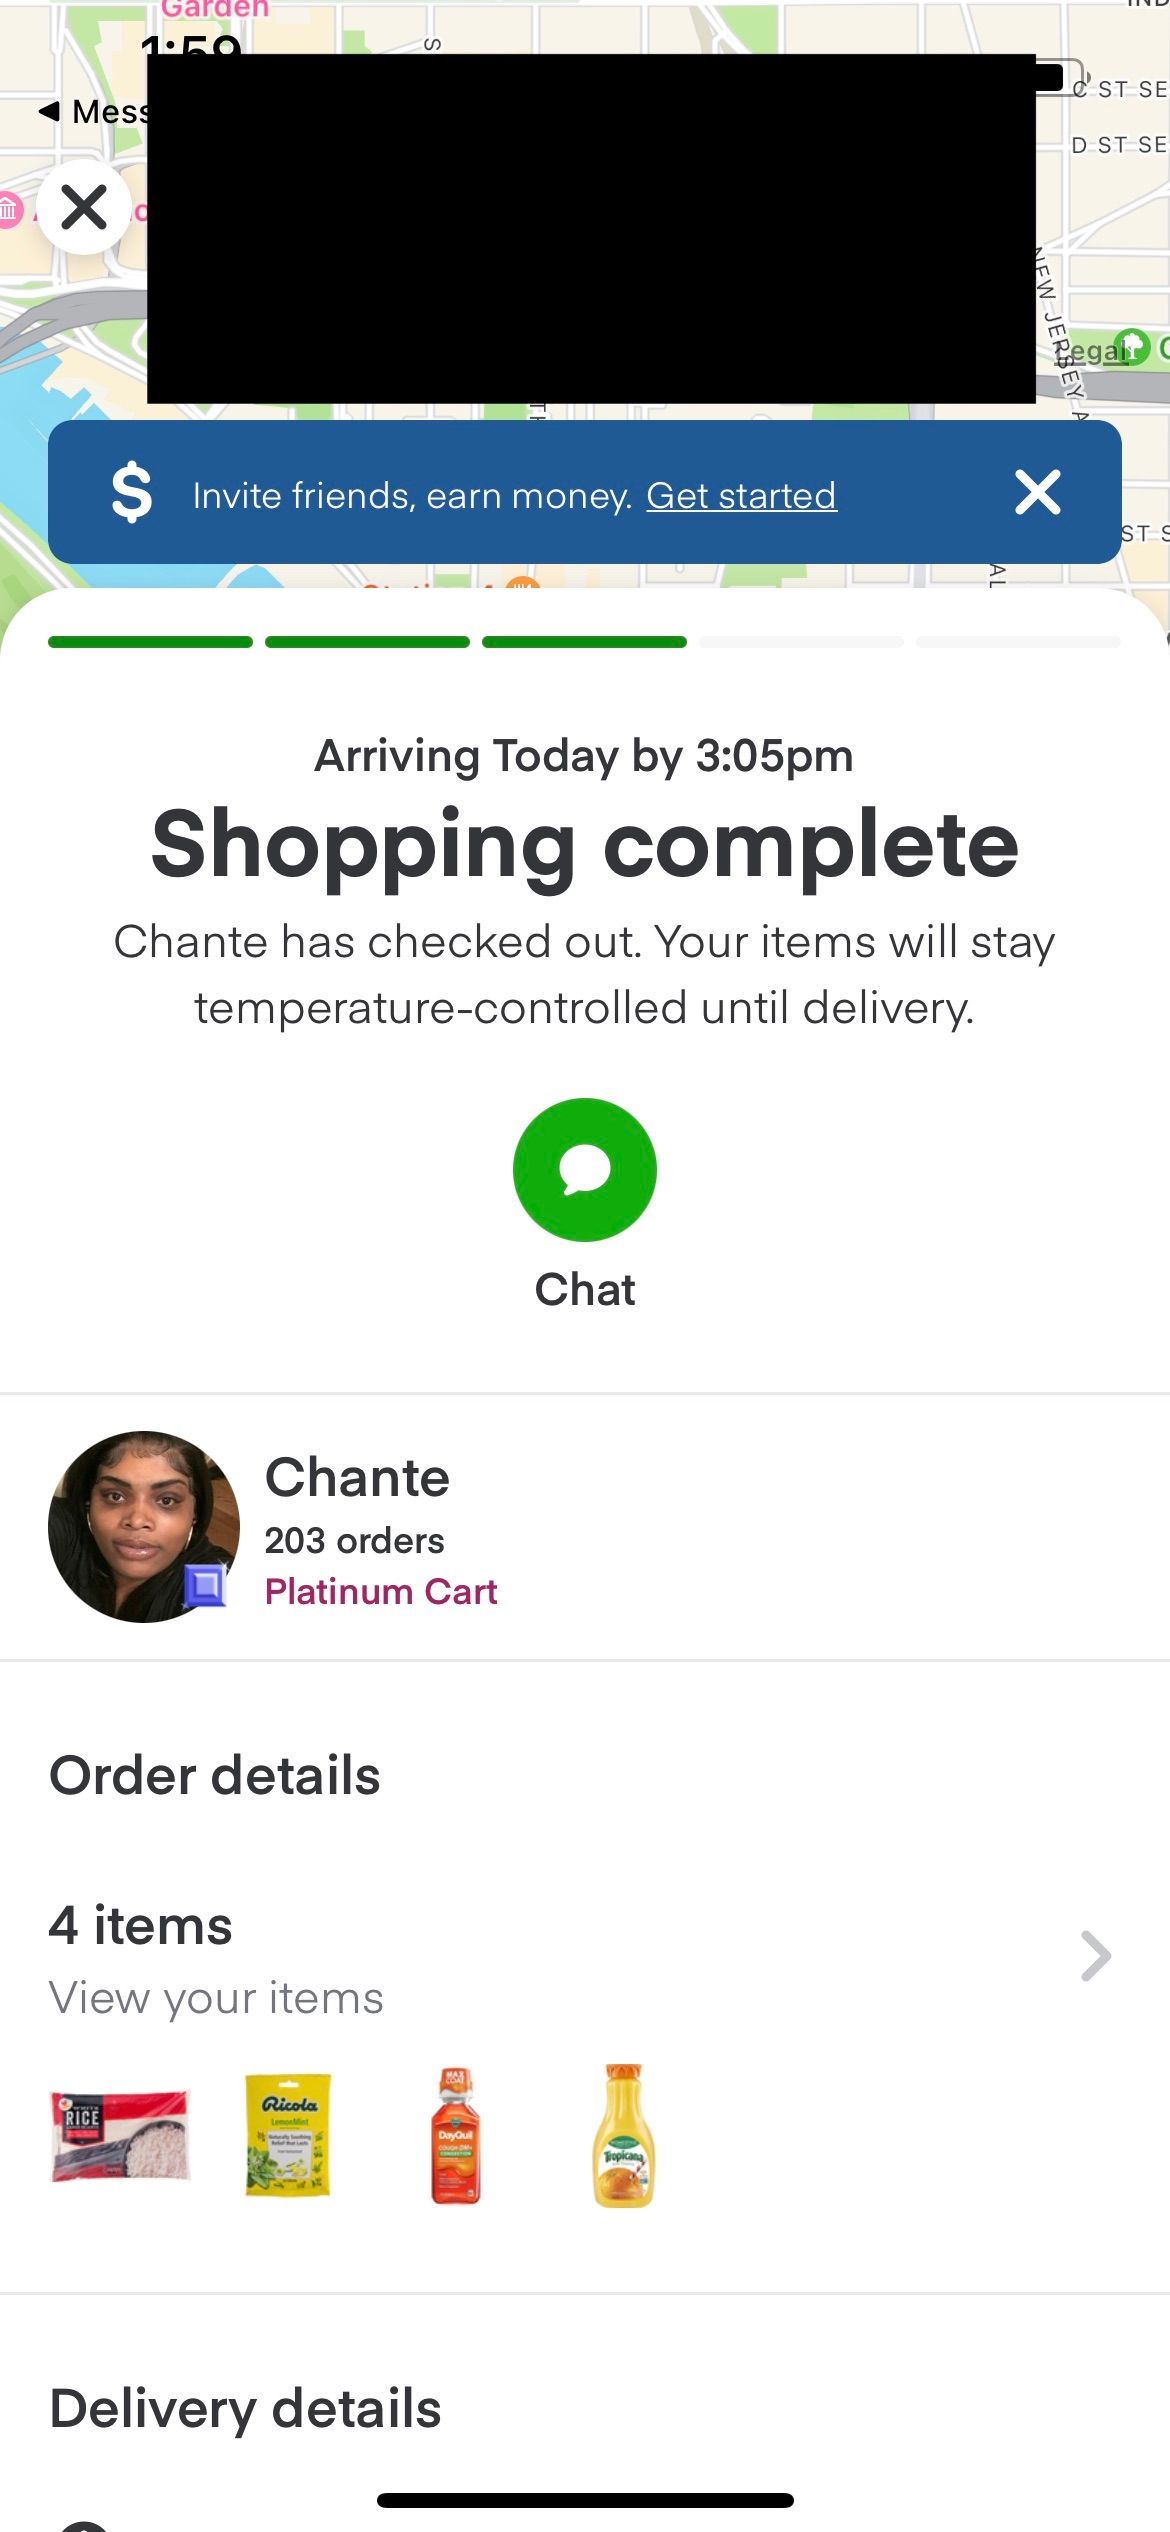 Shopping Complete on Instacart